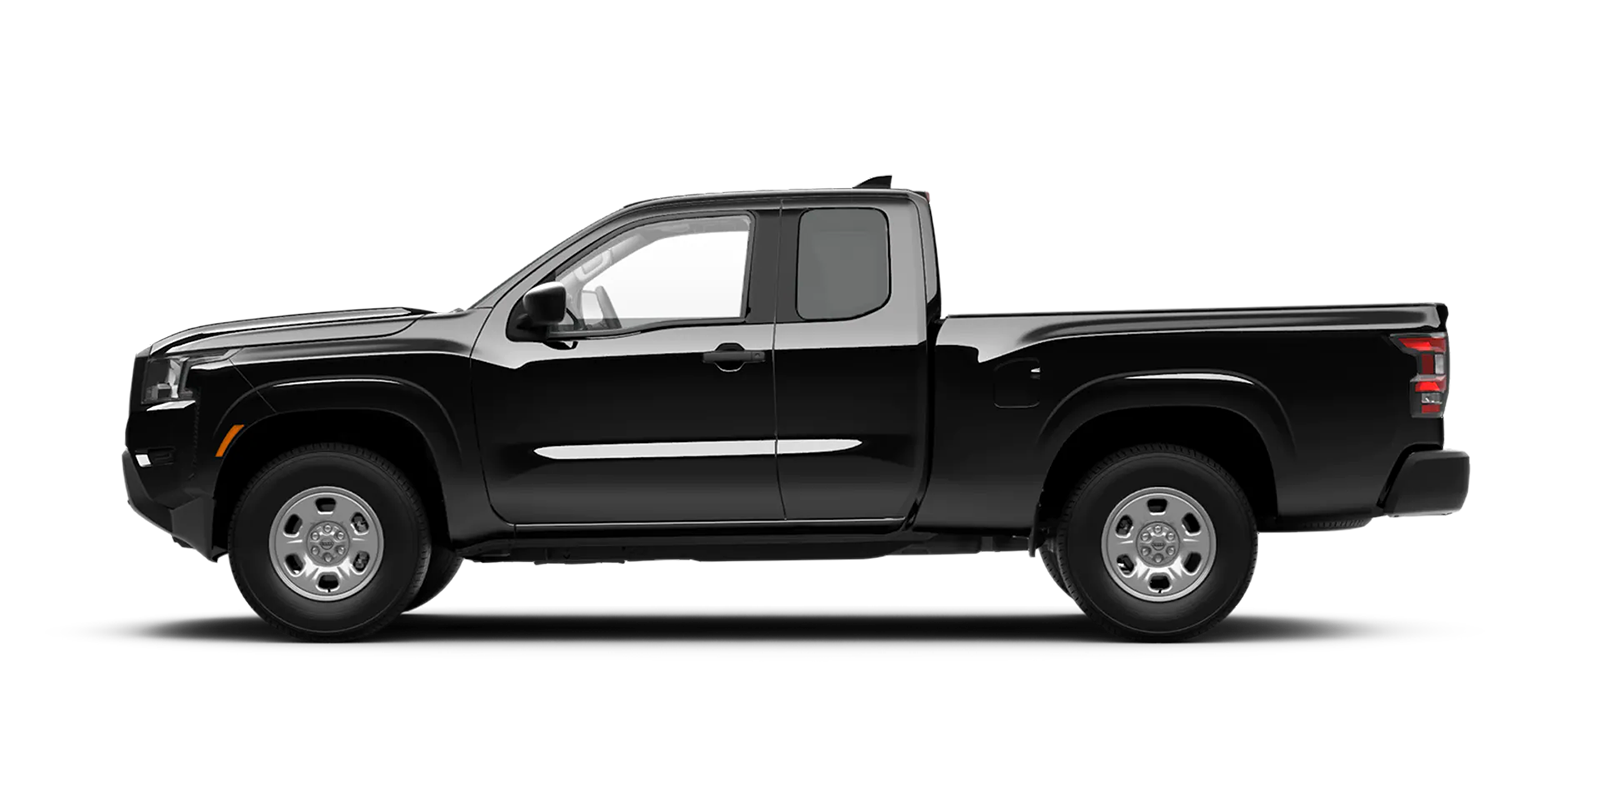 2022 Frontier King Cab S 4x2 in Super Black | Fort Collins Nissan in Fort Collins CO